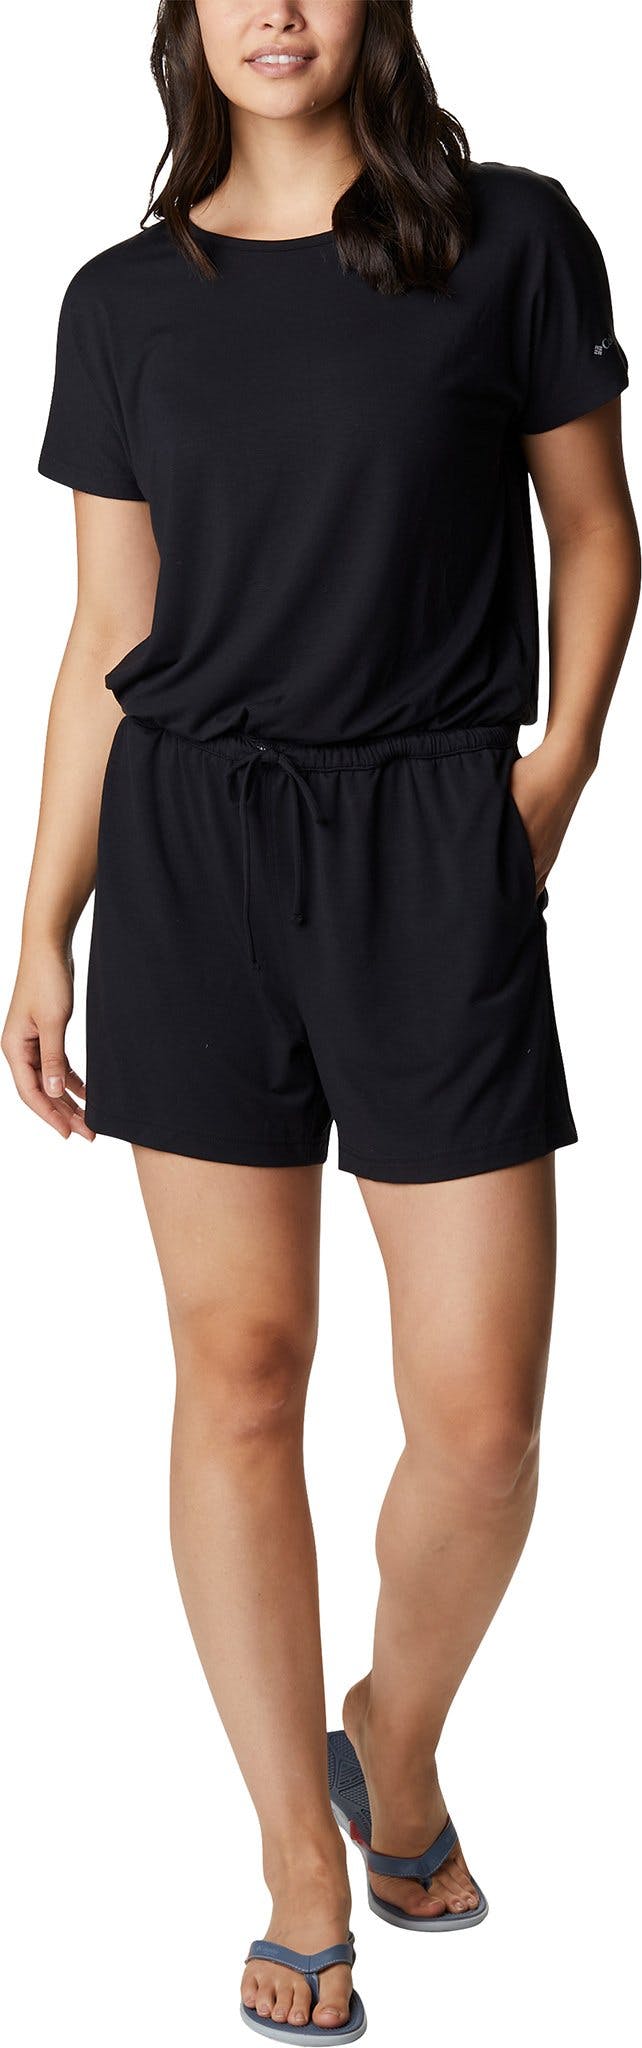 Product image for Slack Water™ Knit Romper - Women's